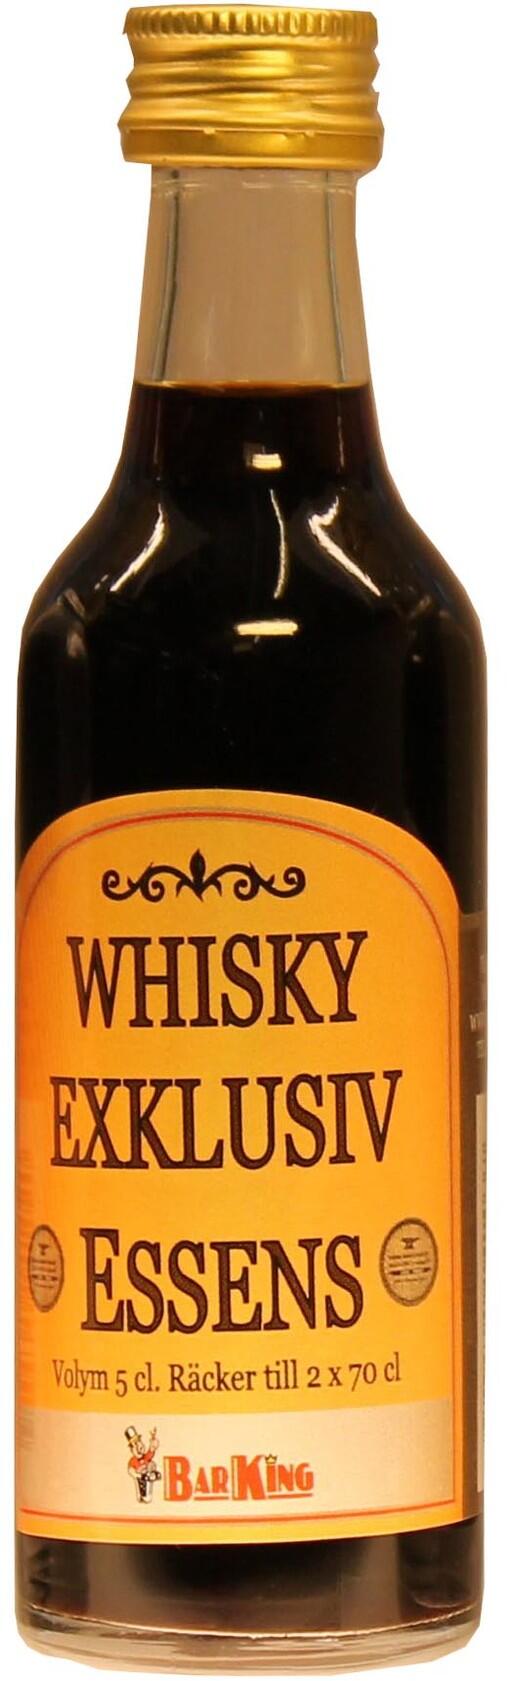 Whisky Exklusive 5 cl